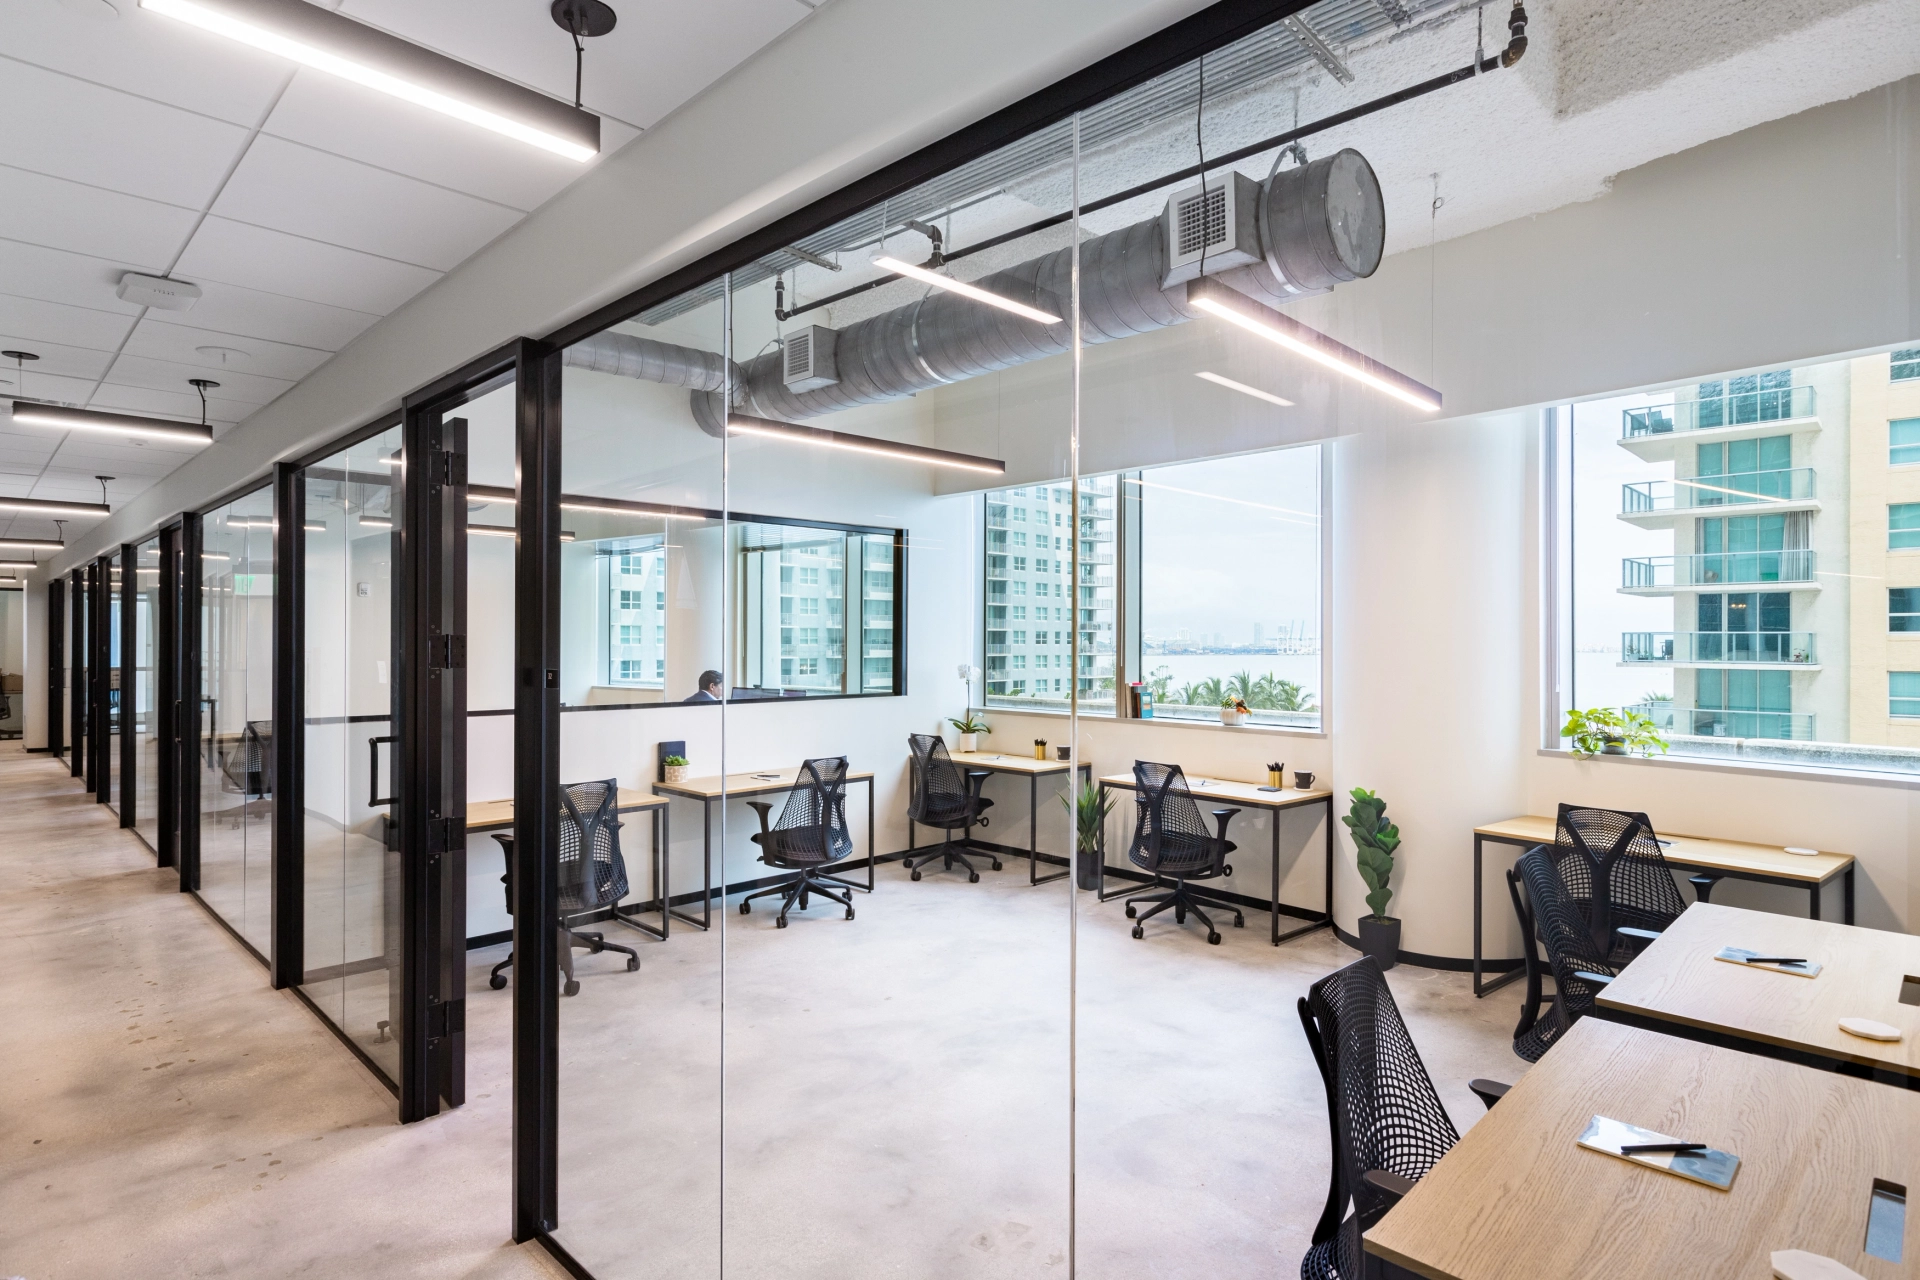 An open Miami workspace with glass walls and desks.